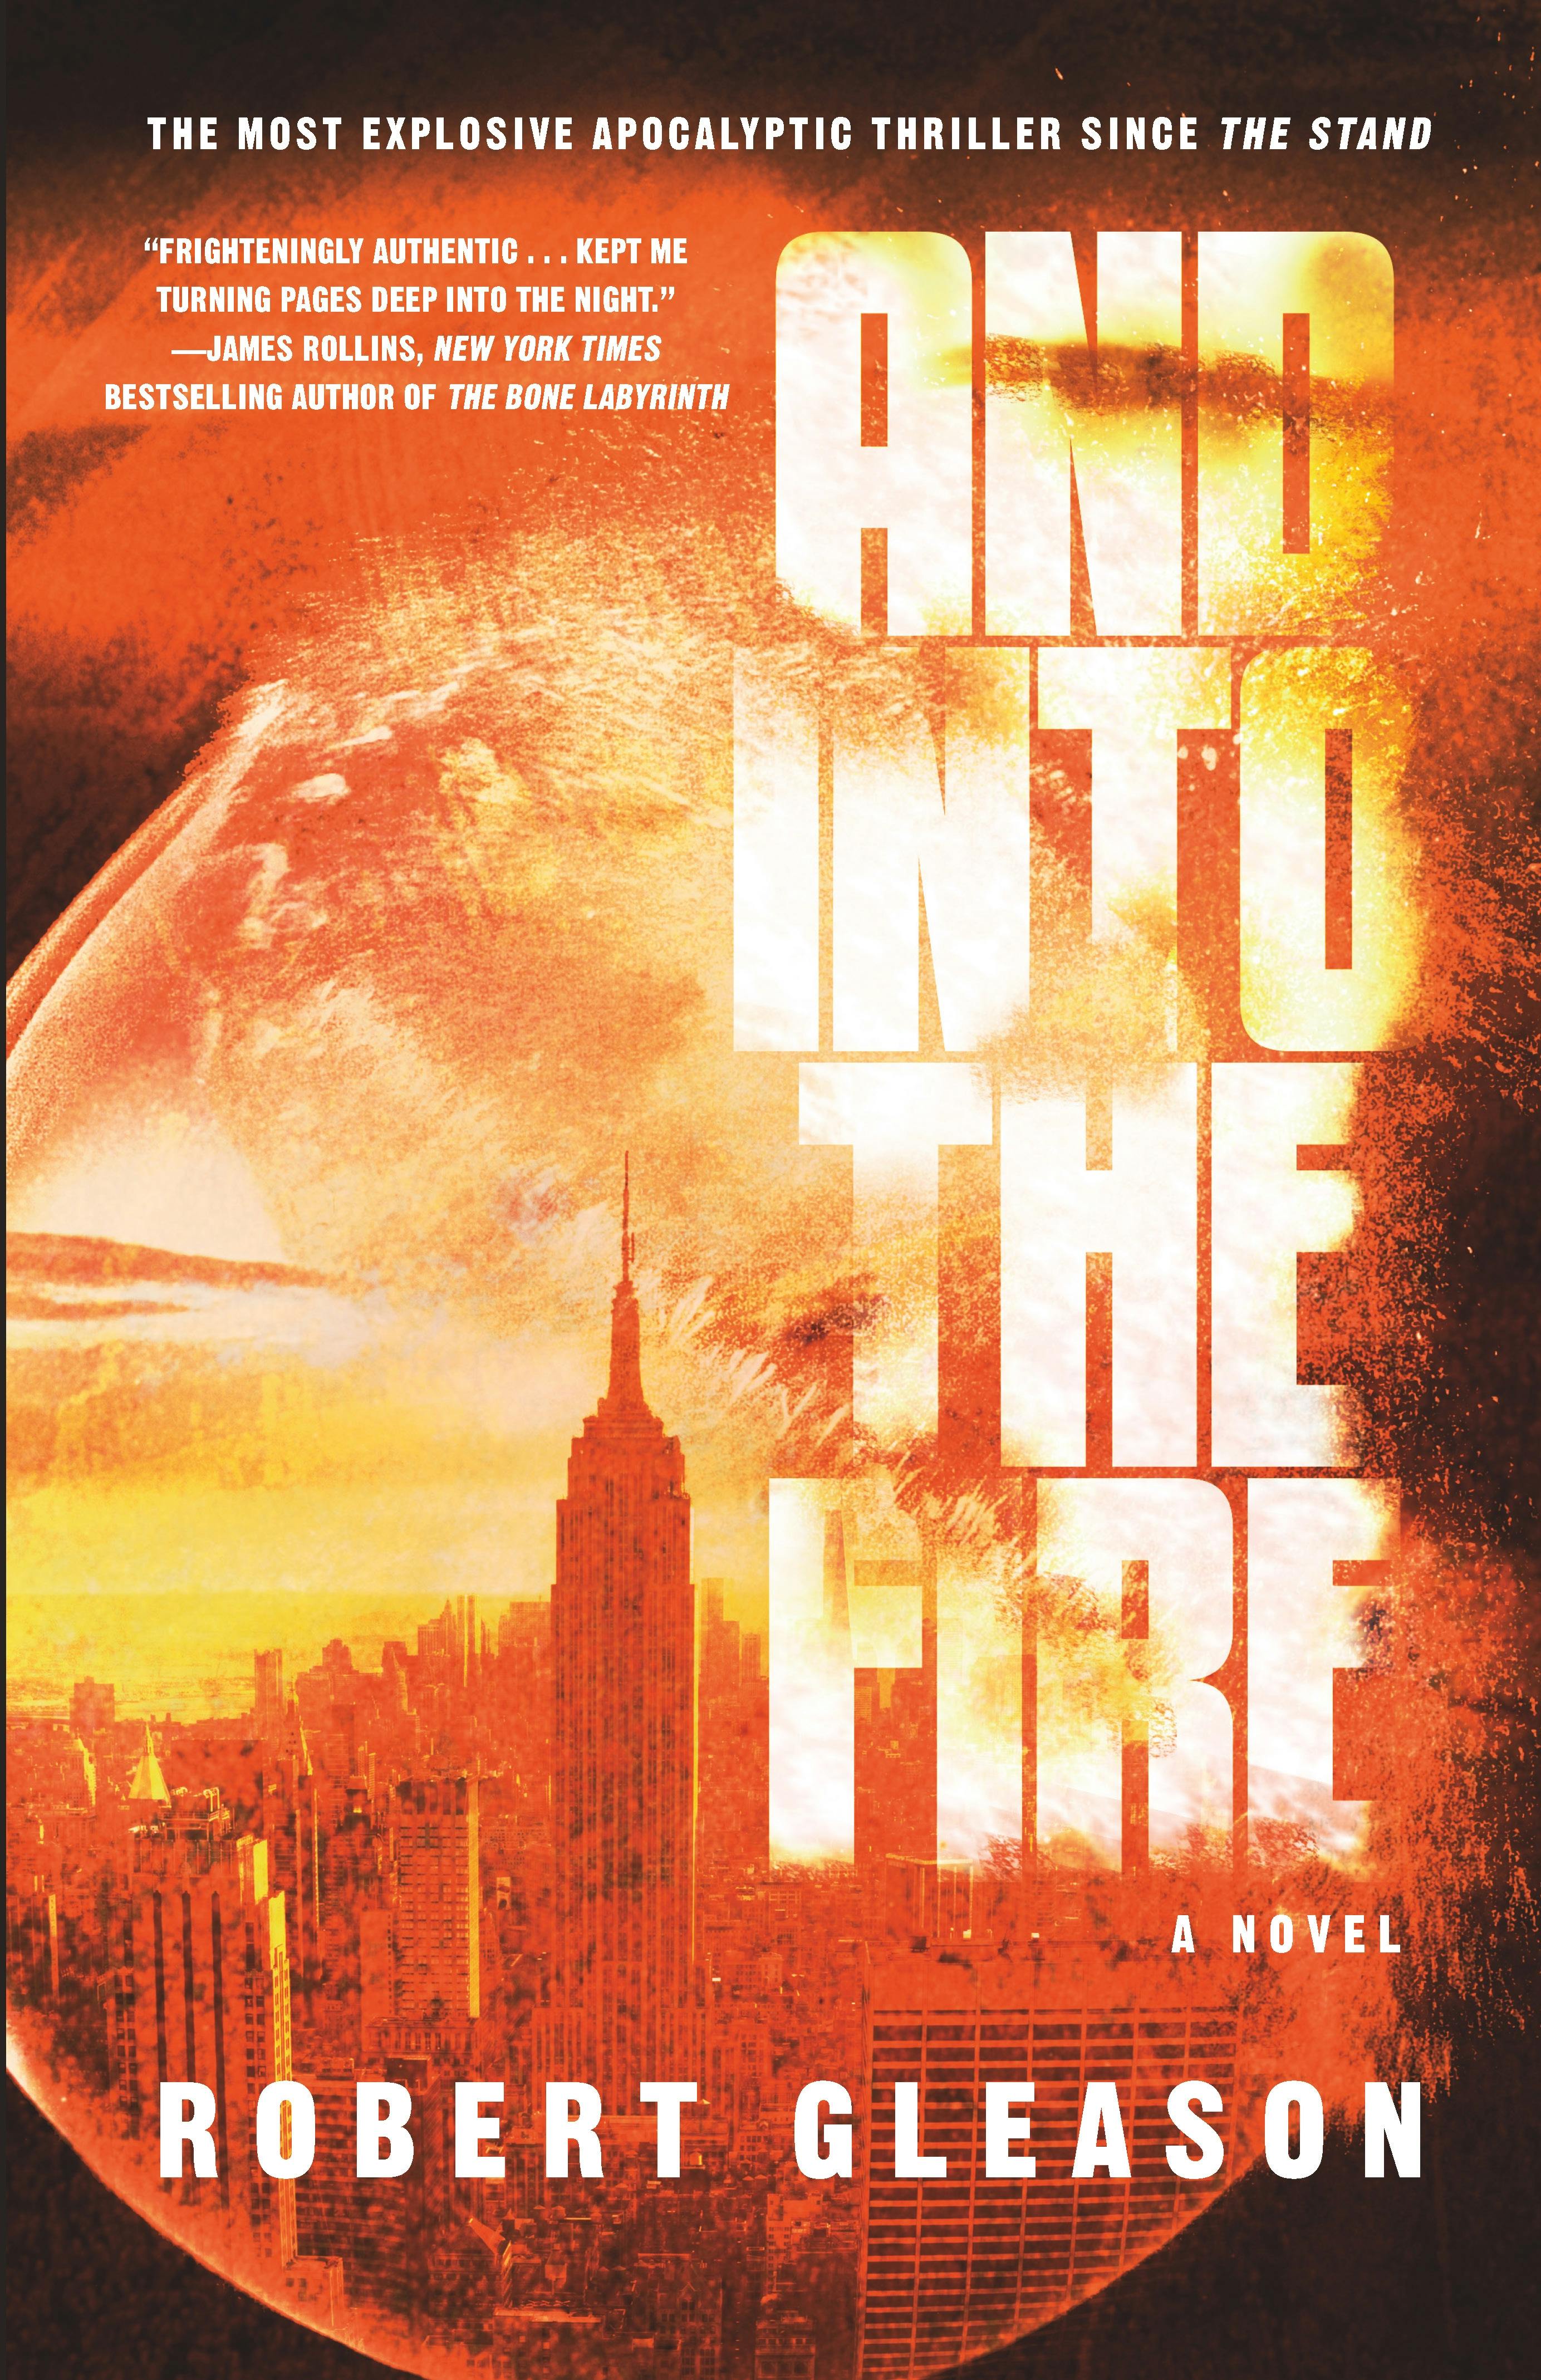 Cover for the book titled as: And Into the Fire